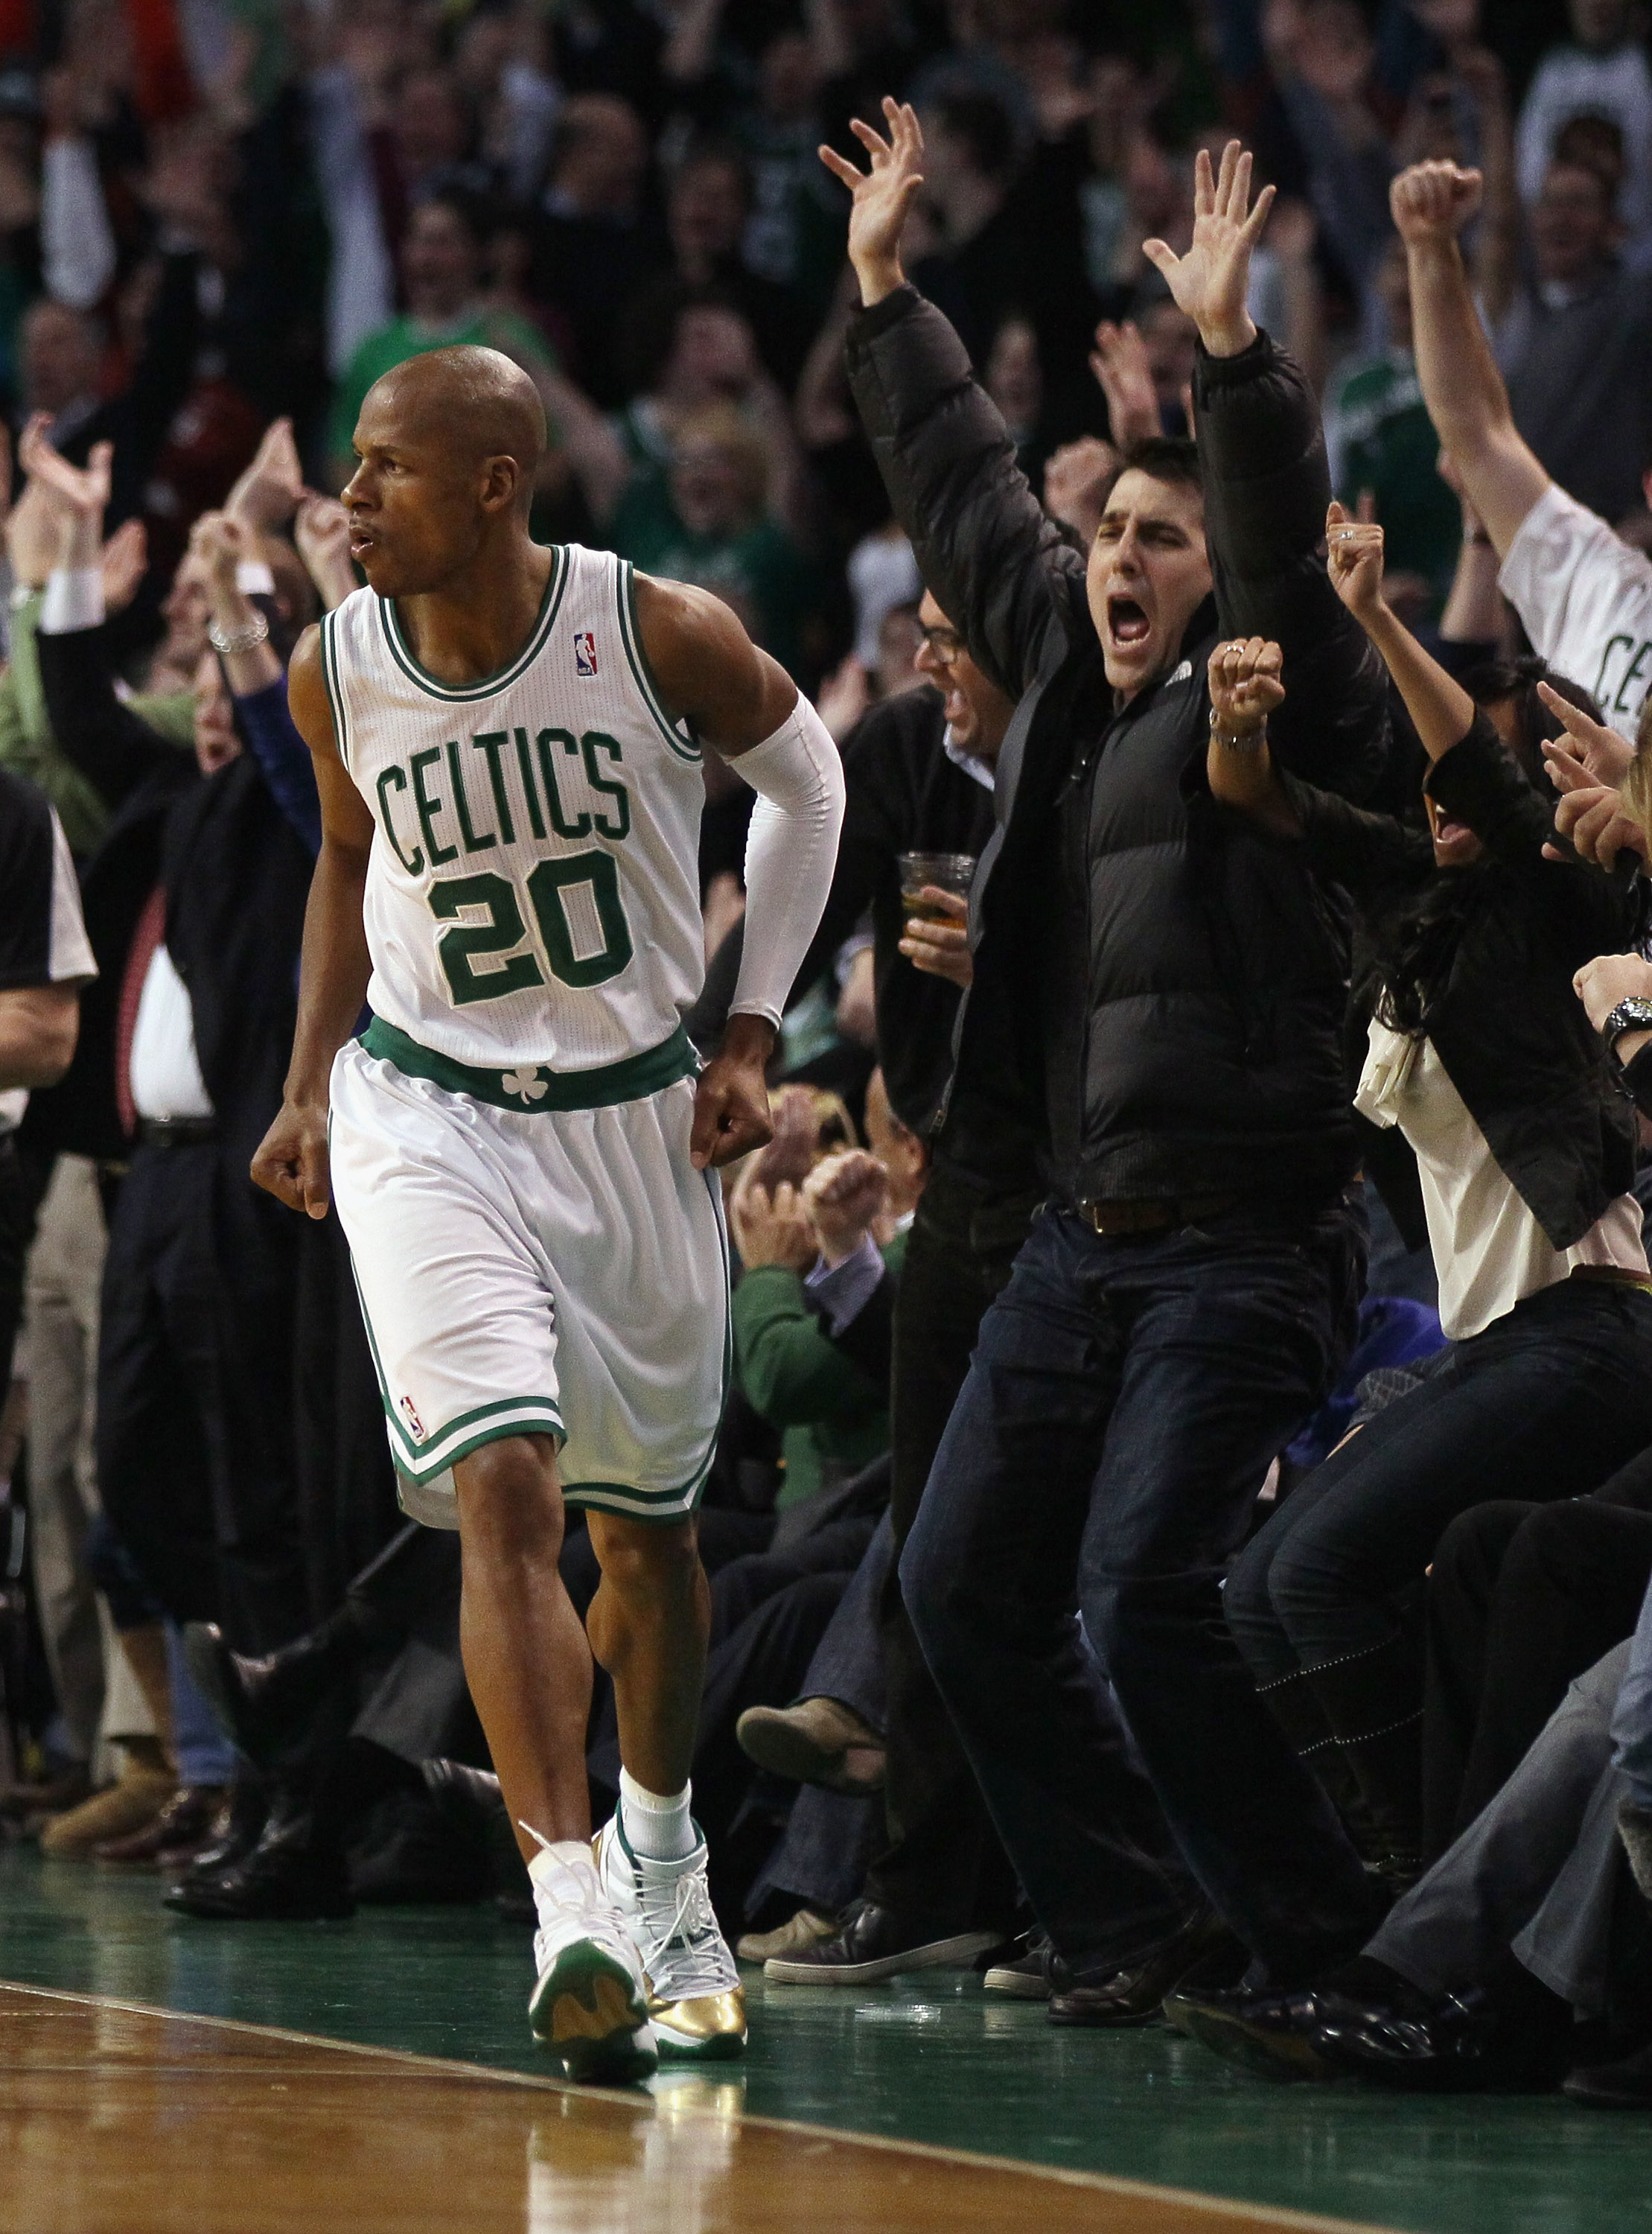 BOSTON, MA - JANUARY 19:  Ray Allen #20 of the Boston Celtics celebrates his game winning shot in the fourth quarter against the Detroit Pistons on January 19, 2011 at the TD Garden in Boston, Massachusetts. The Celtics defeated the Pistons 86-82. NOTE TO